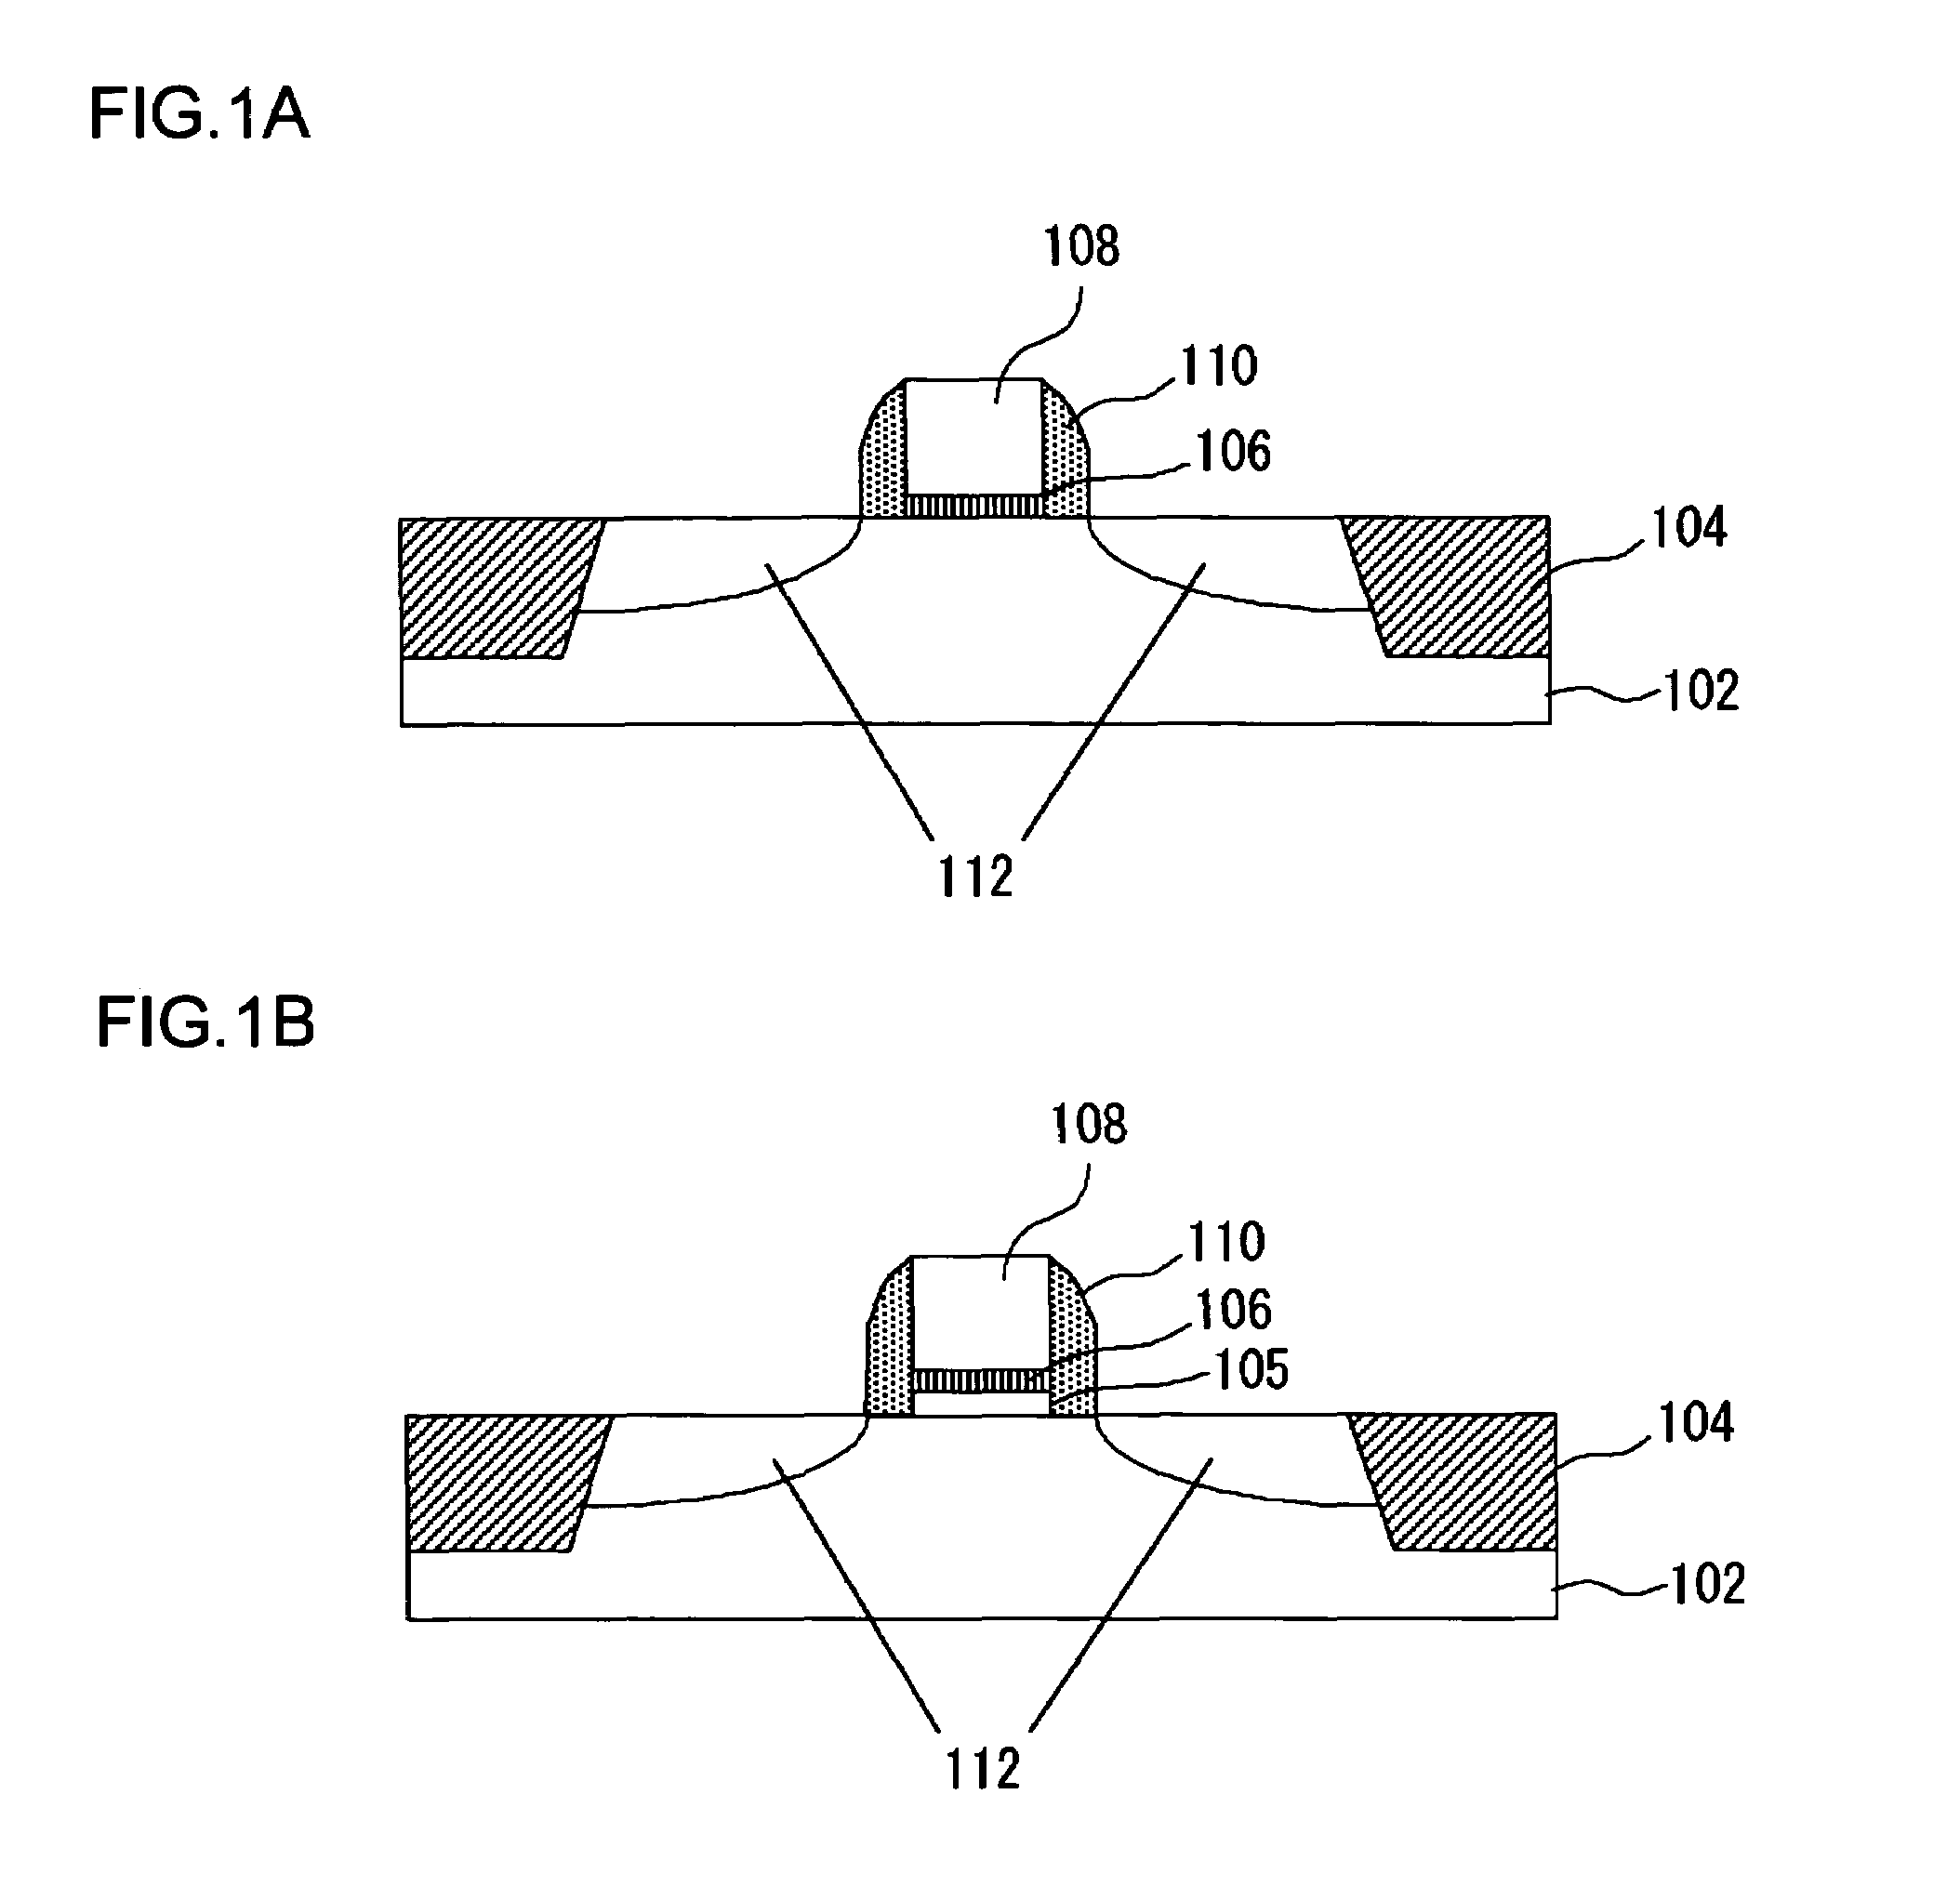 Method of fabricating a metal oxynitride thin film that includes a first annealing of a metal oxide film in a nitrogen-containing atmosphere to form a metal oxynitride film and a second annealing of the metal oxynitride film in an oxidizing atmosphere